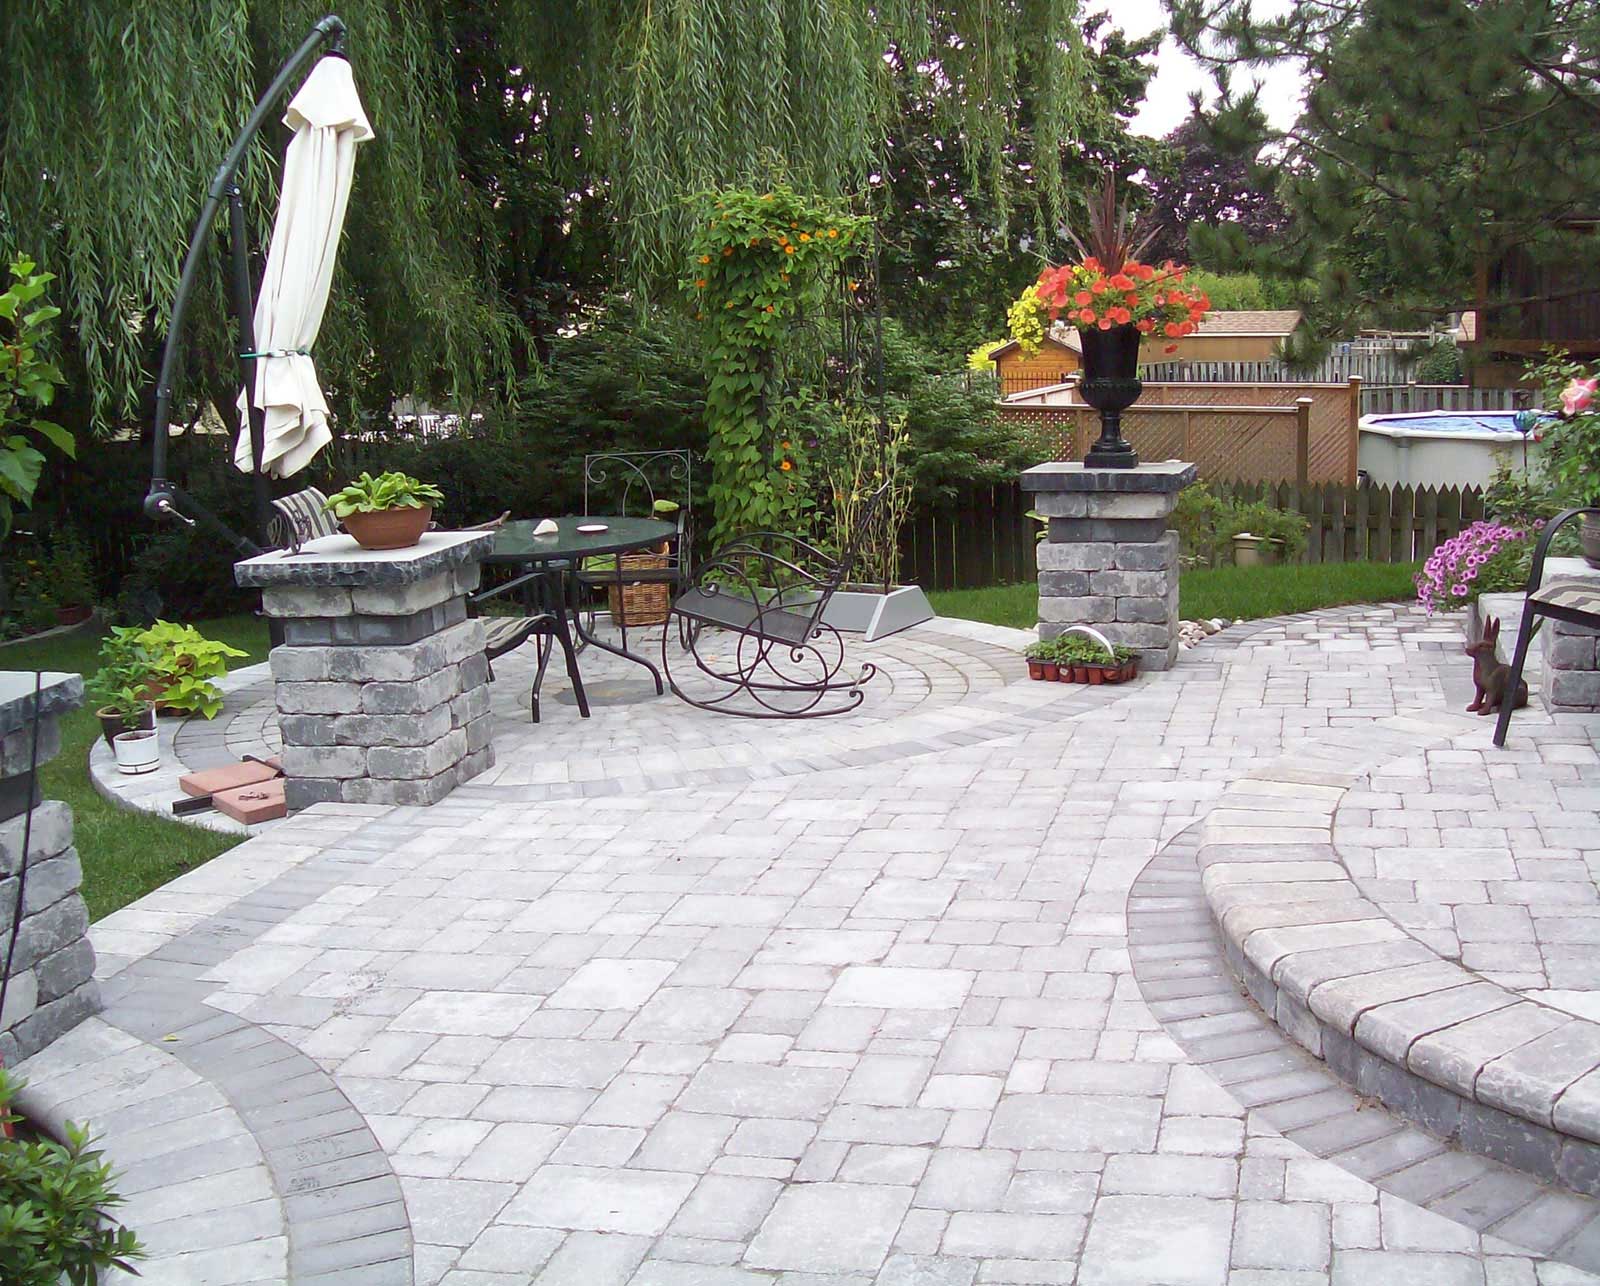 Landscape Design Paver Backyard Landscape Design Decorated With Paver Flooring And Minimalist Traditional Outdoor Furniture Design Ideas Outdoor Backyard Landscape Design To Make The Most Of Your Space